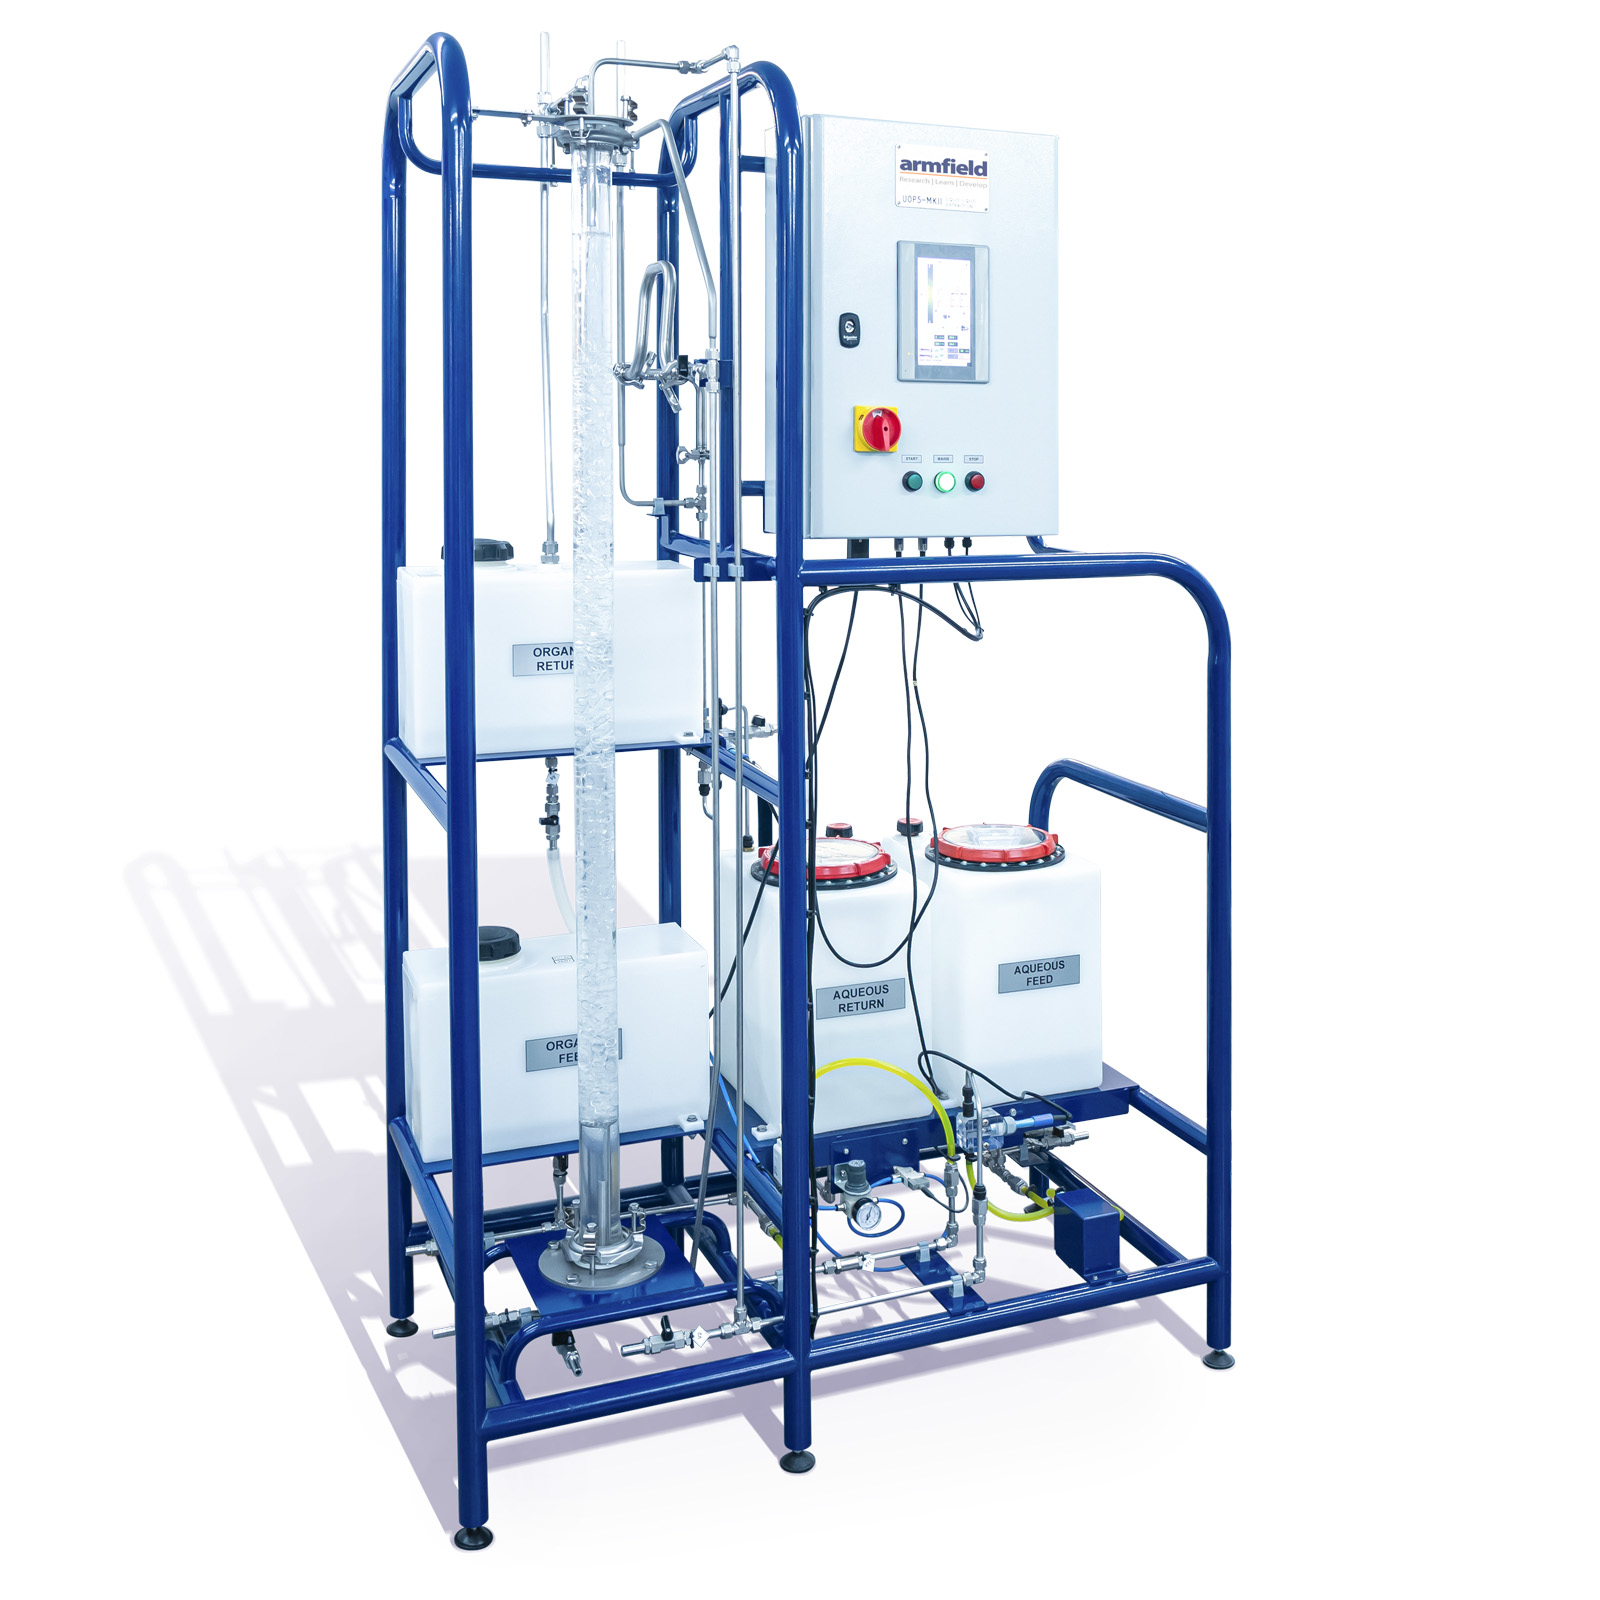 UOP4 MKII - Solid/Liquid Extraction Unit - Armfield